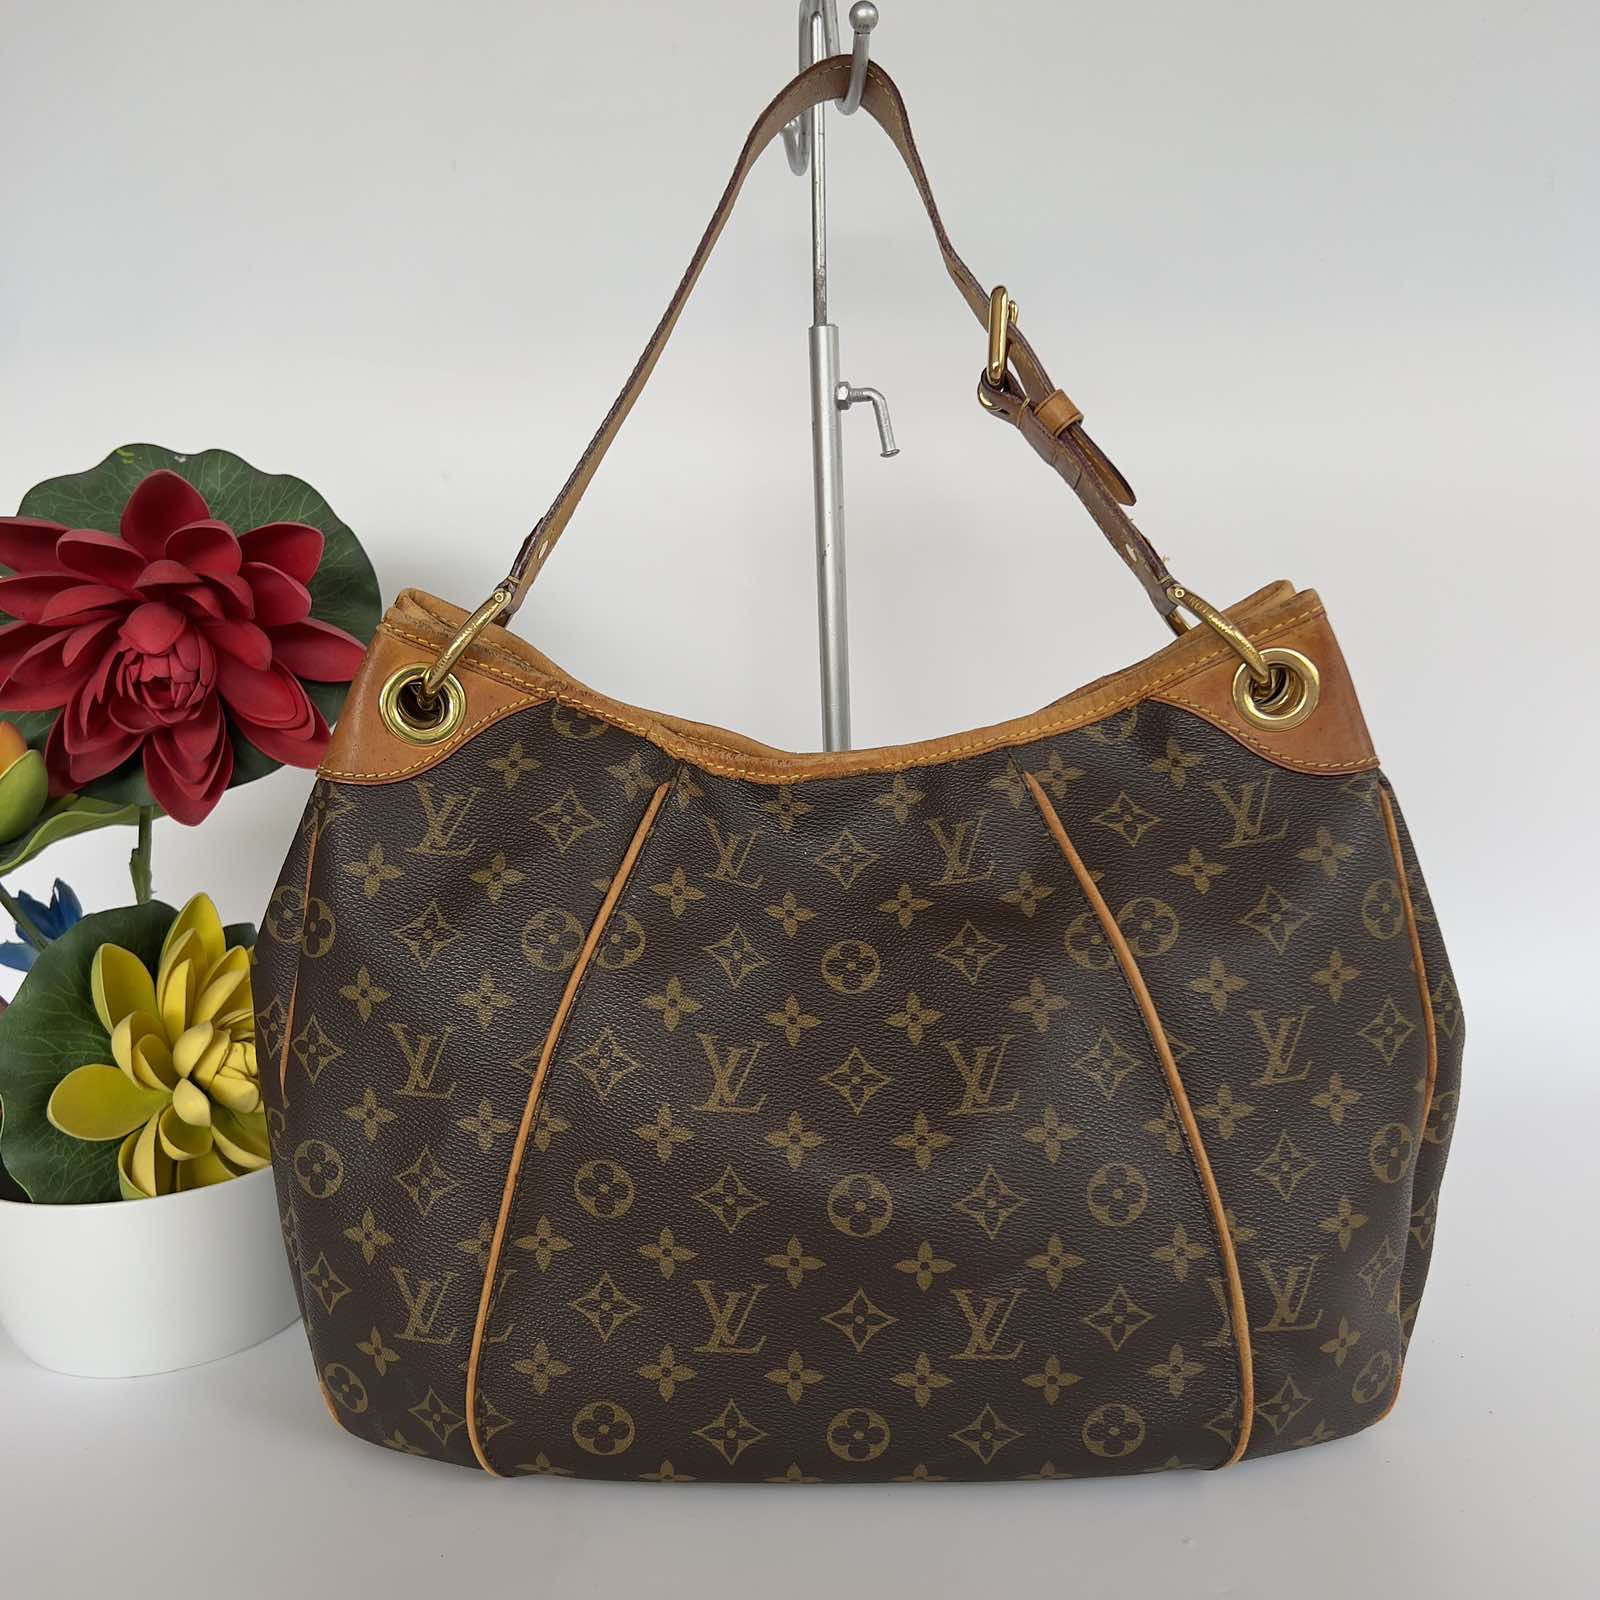 Louis Vuitton Monogram Canvas Delightful PM. Made in France. No inclusions  ❤️